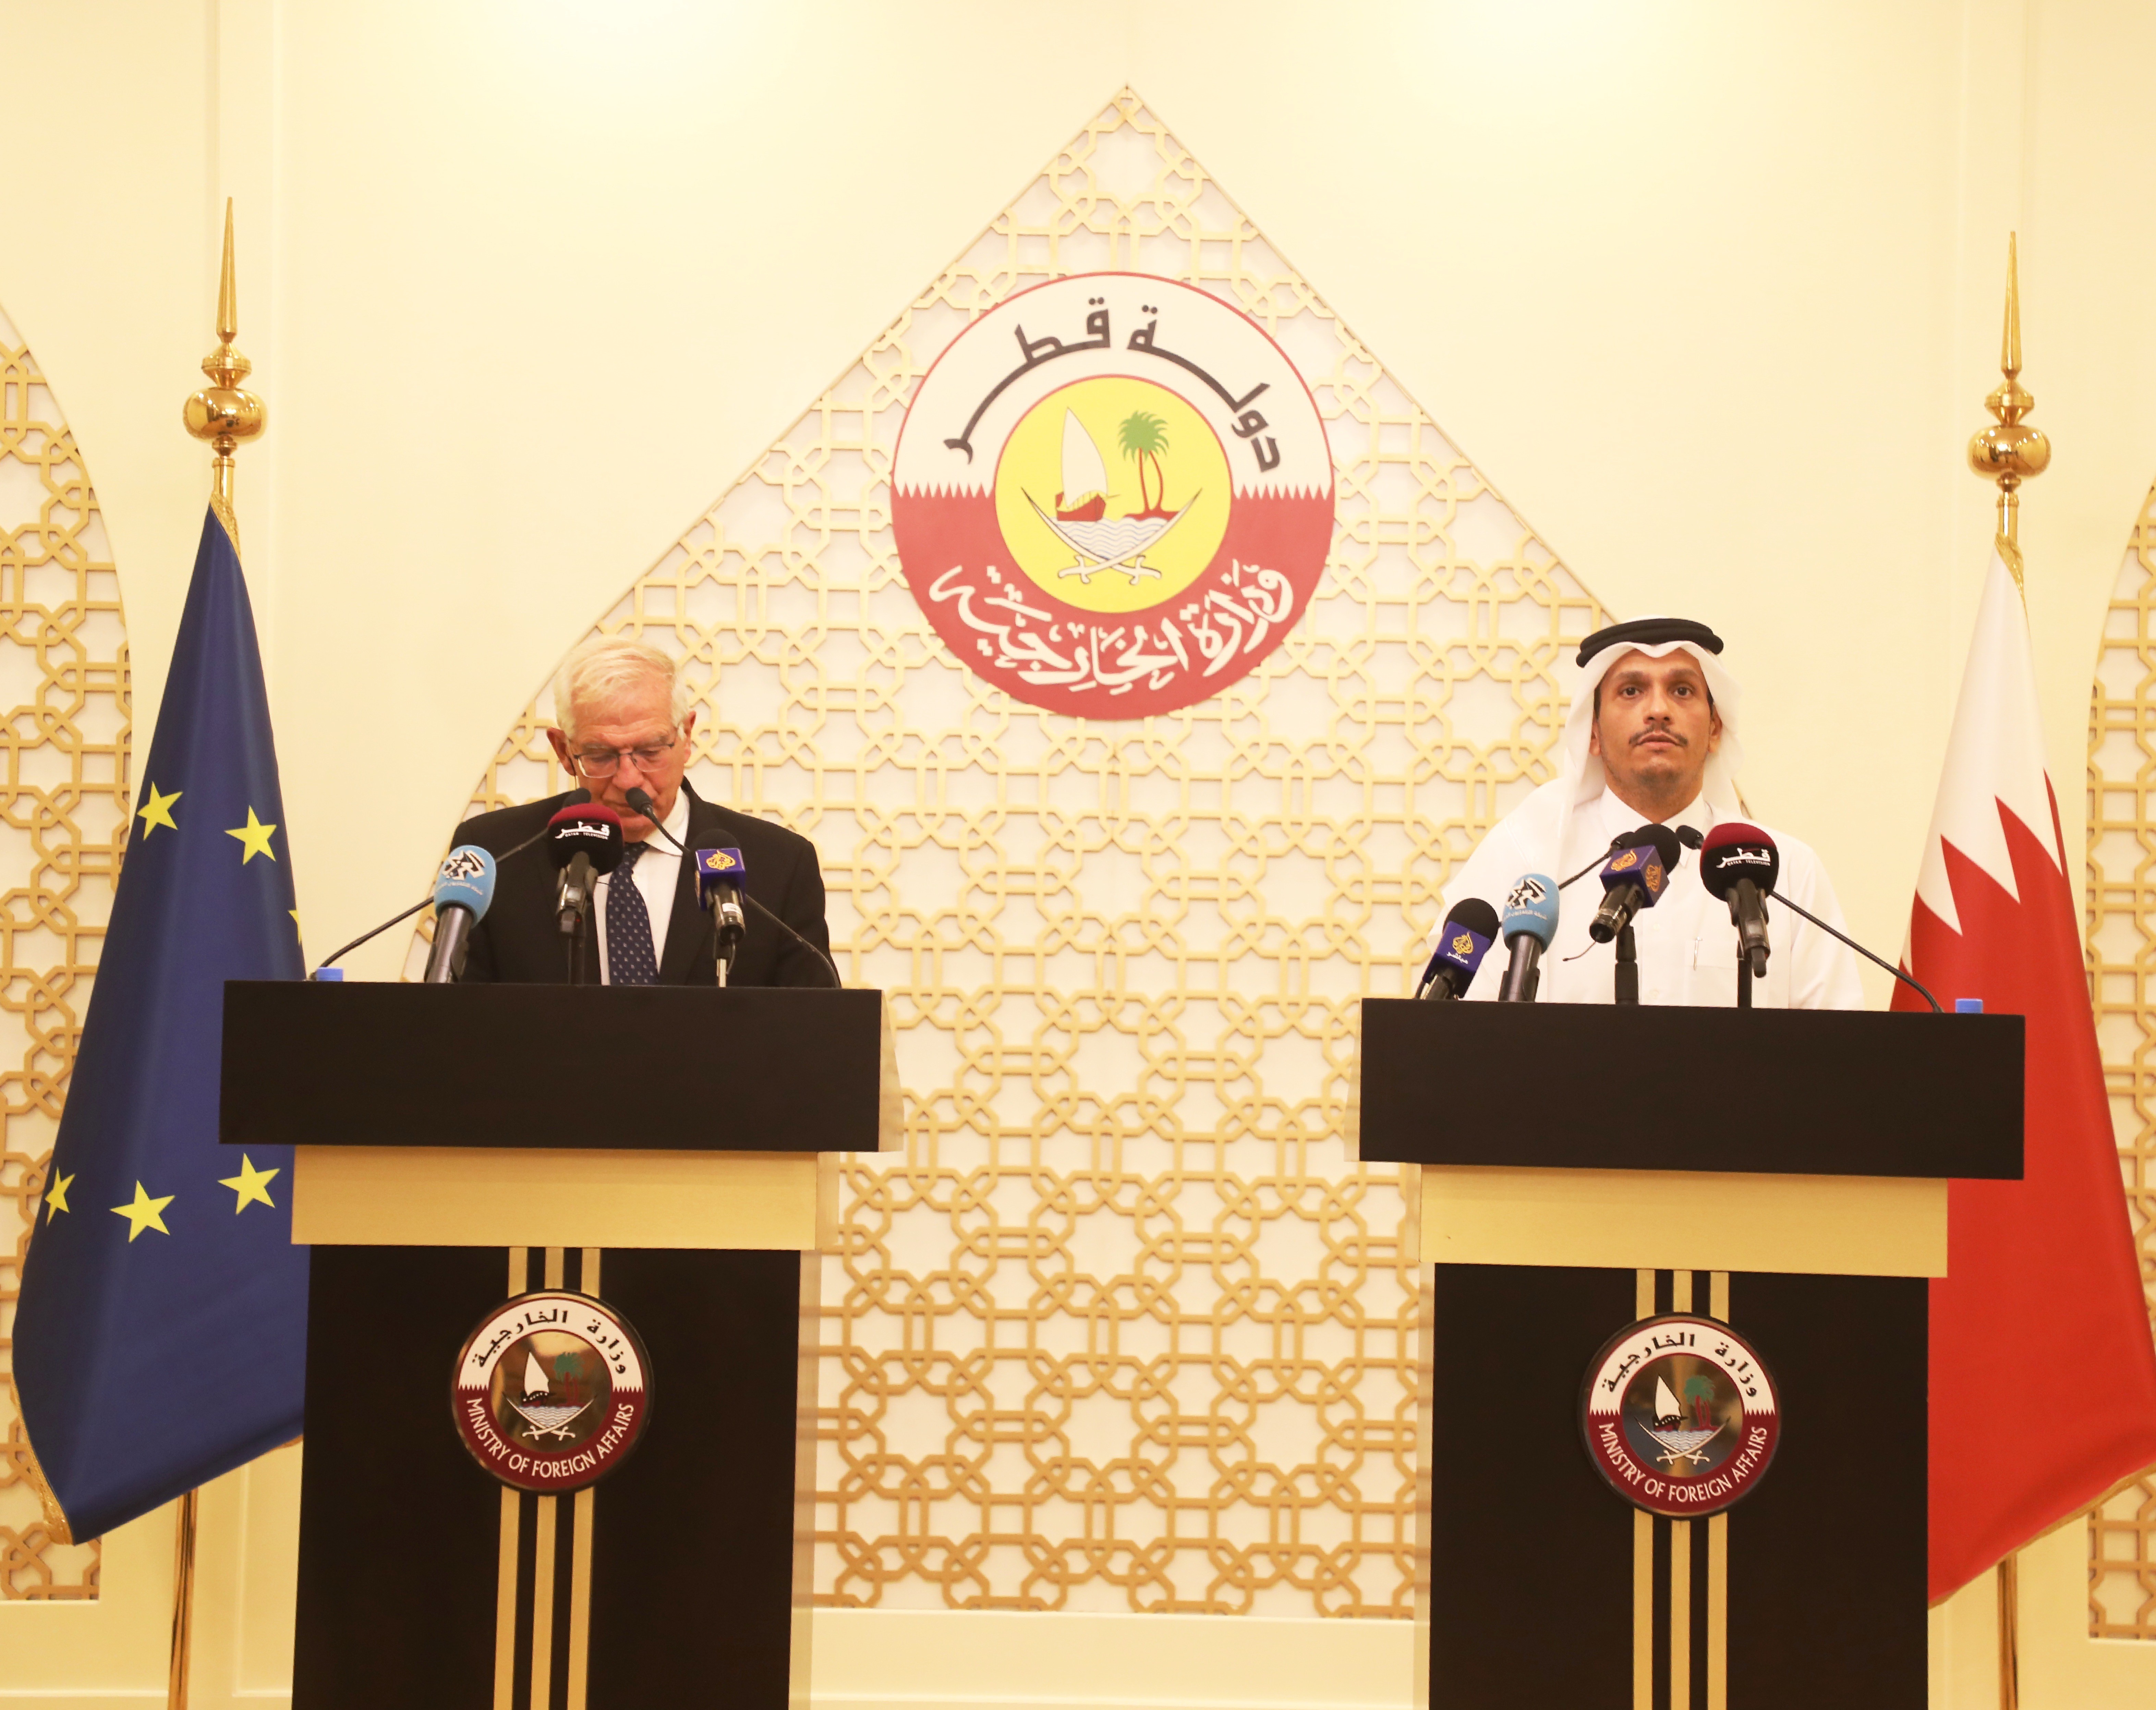 Deputy Prime Minister and Minister of Foreign Affairs Stresses Importance of Qatar-EU Relations